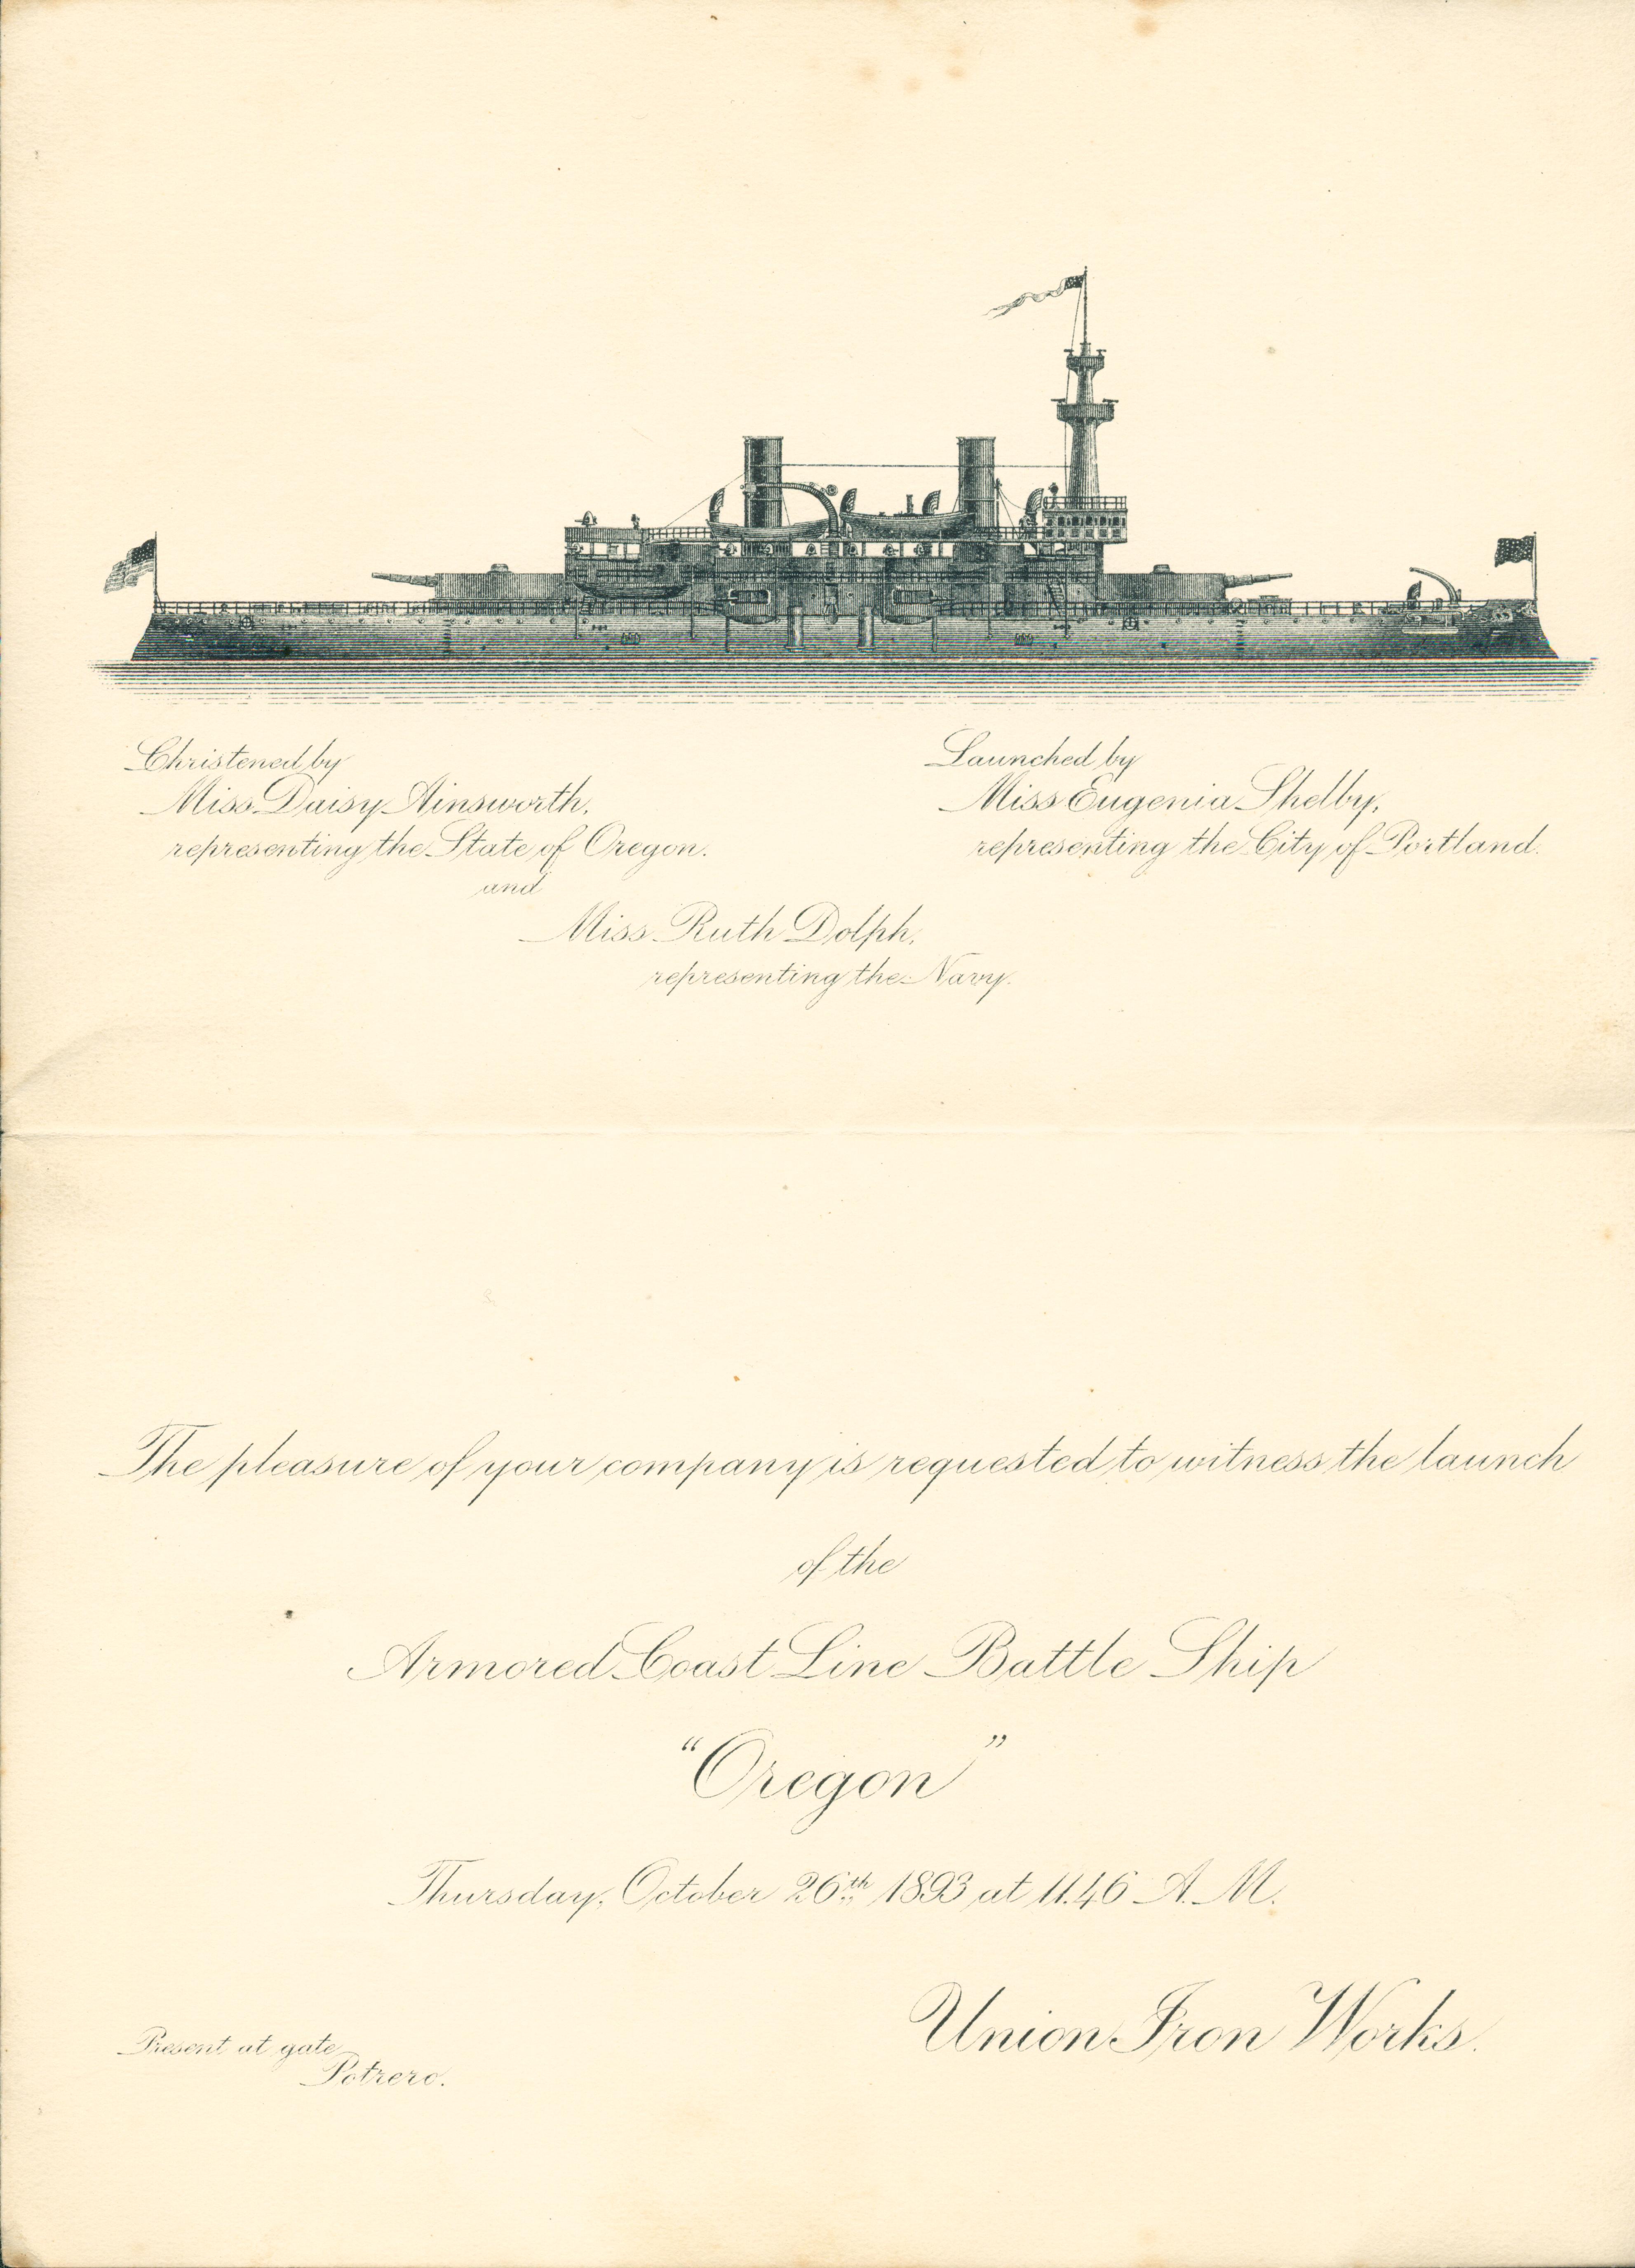 Front cover shows ship above basic invitation information